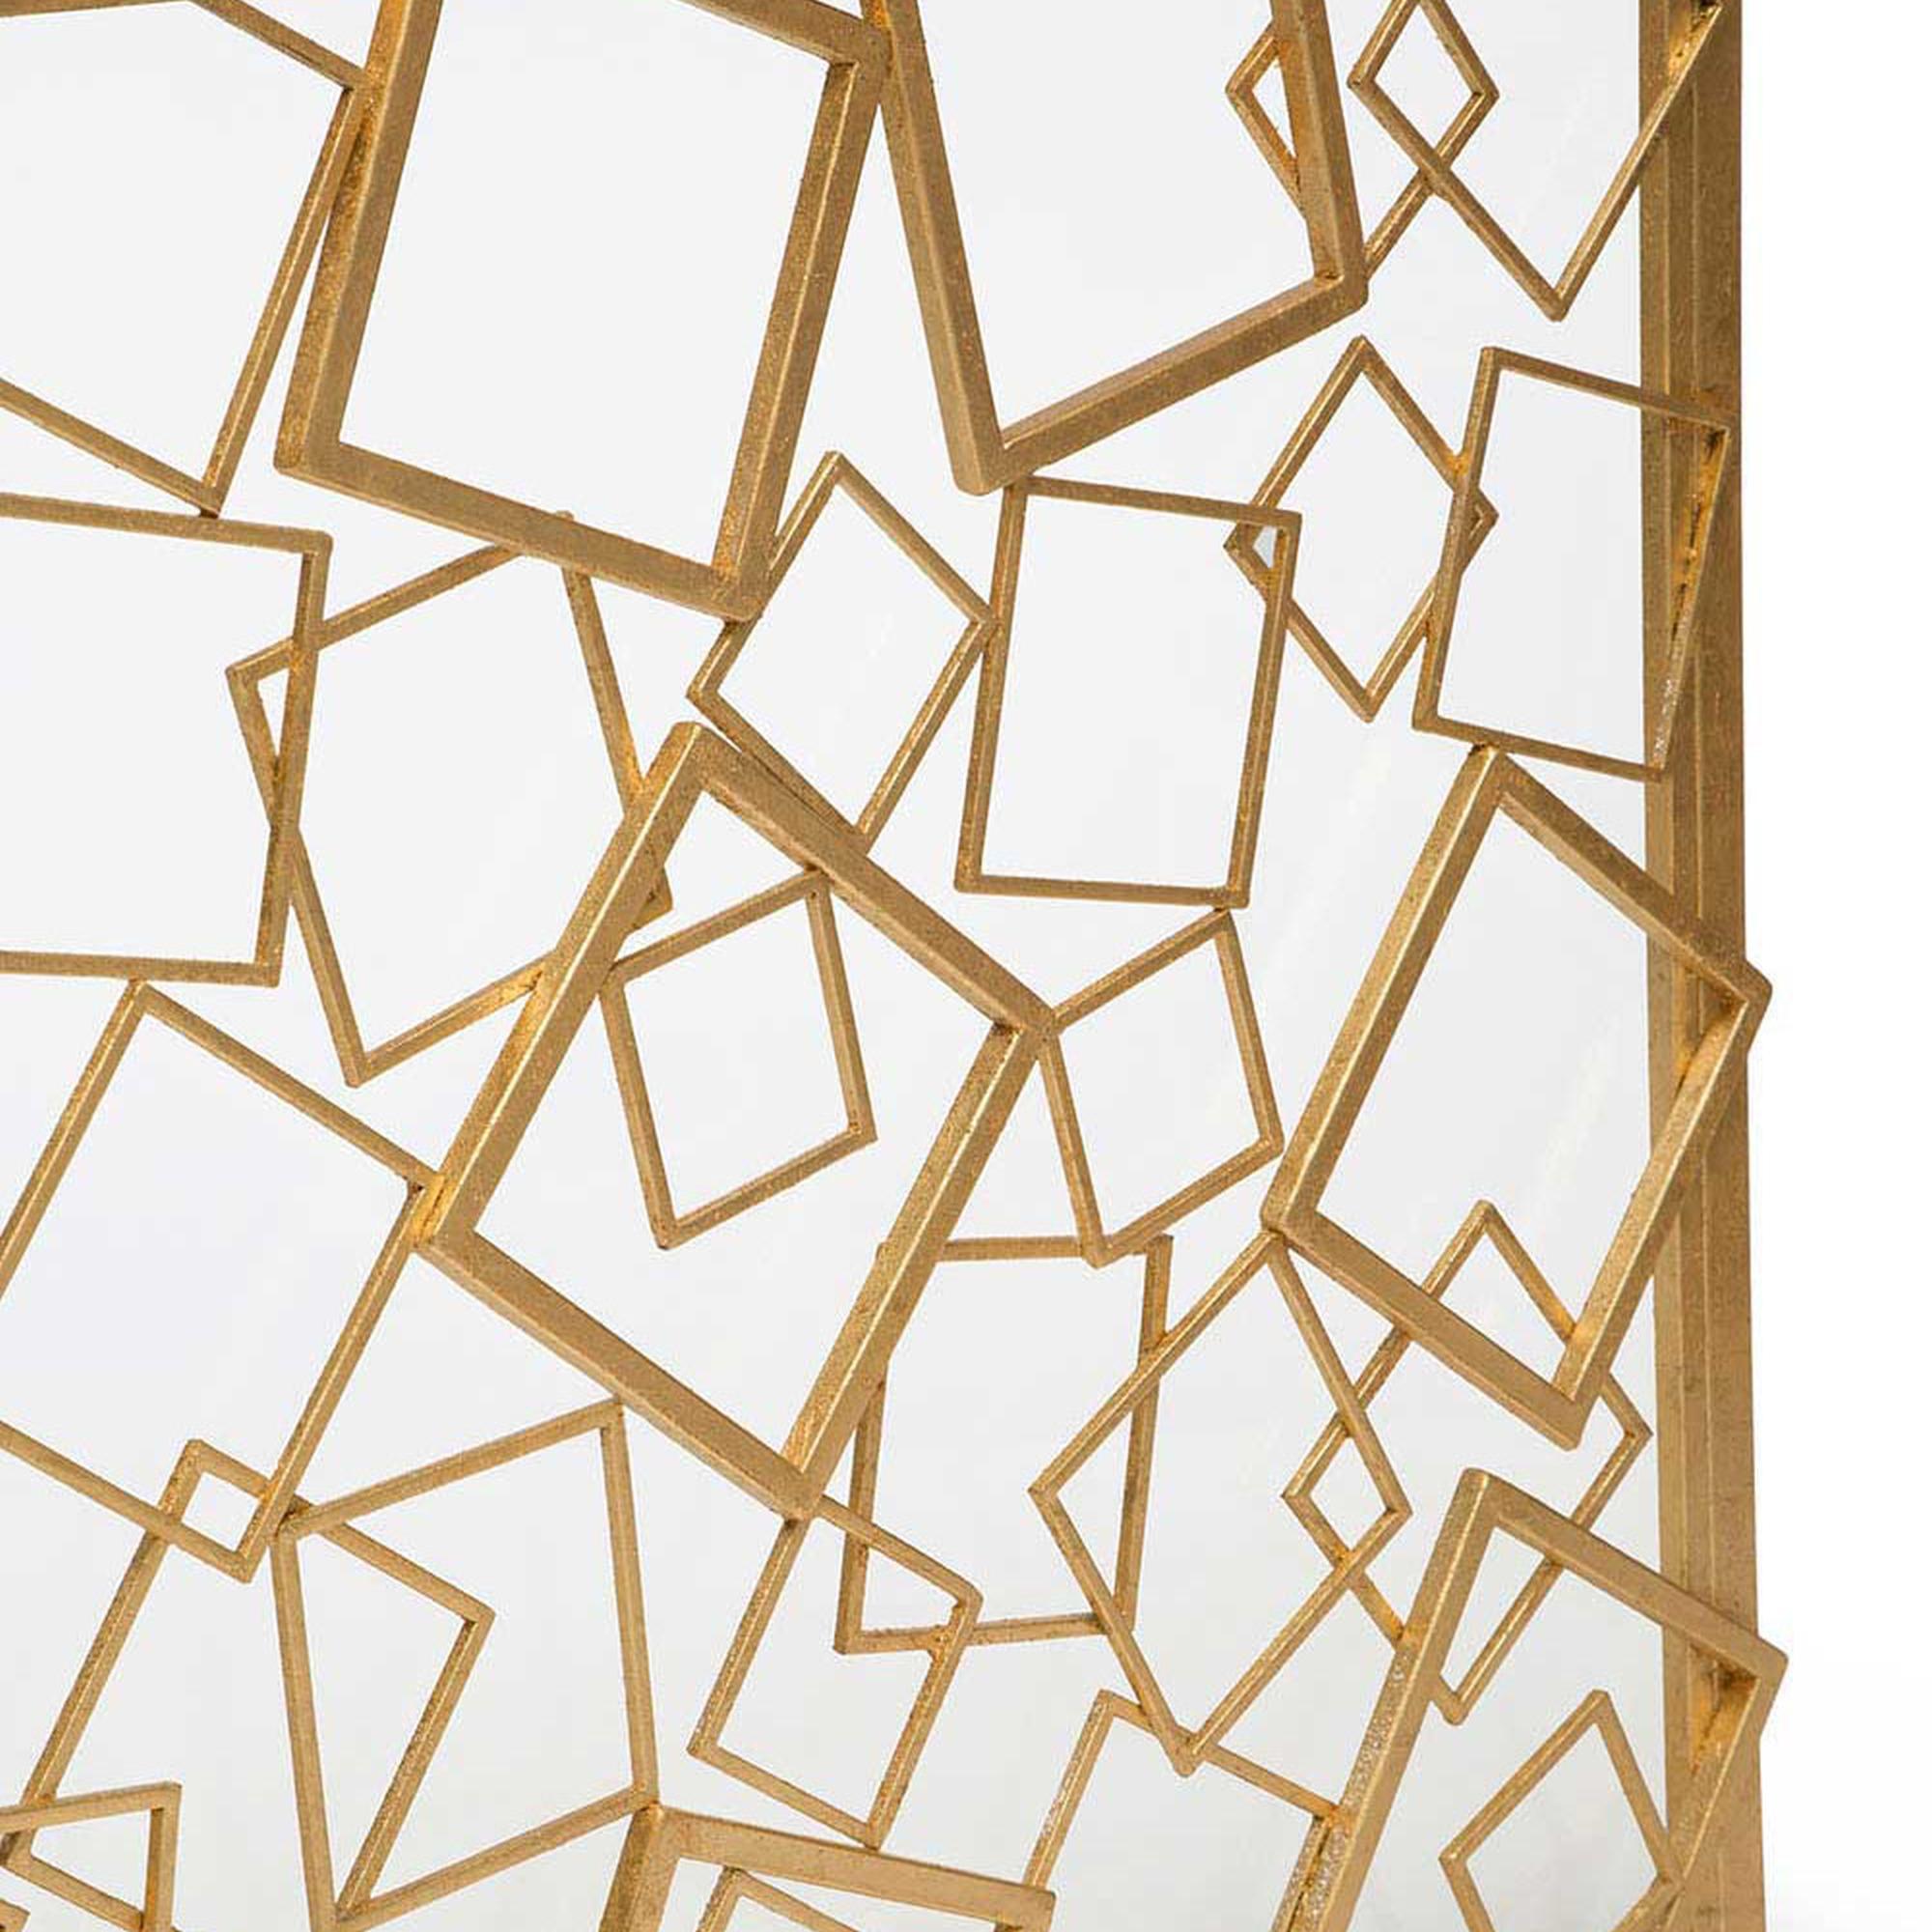 Mesmerizing medleys of hand-gilded metal structures are precisely placed to form an intricate and elegant re screen. Fitted with clear, tempered glass, the Monterey fireplace screen is architecturally framed with a unique design. Due to the